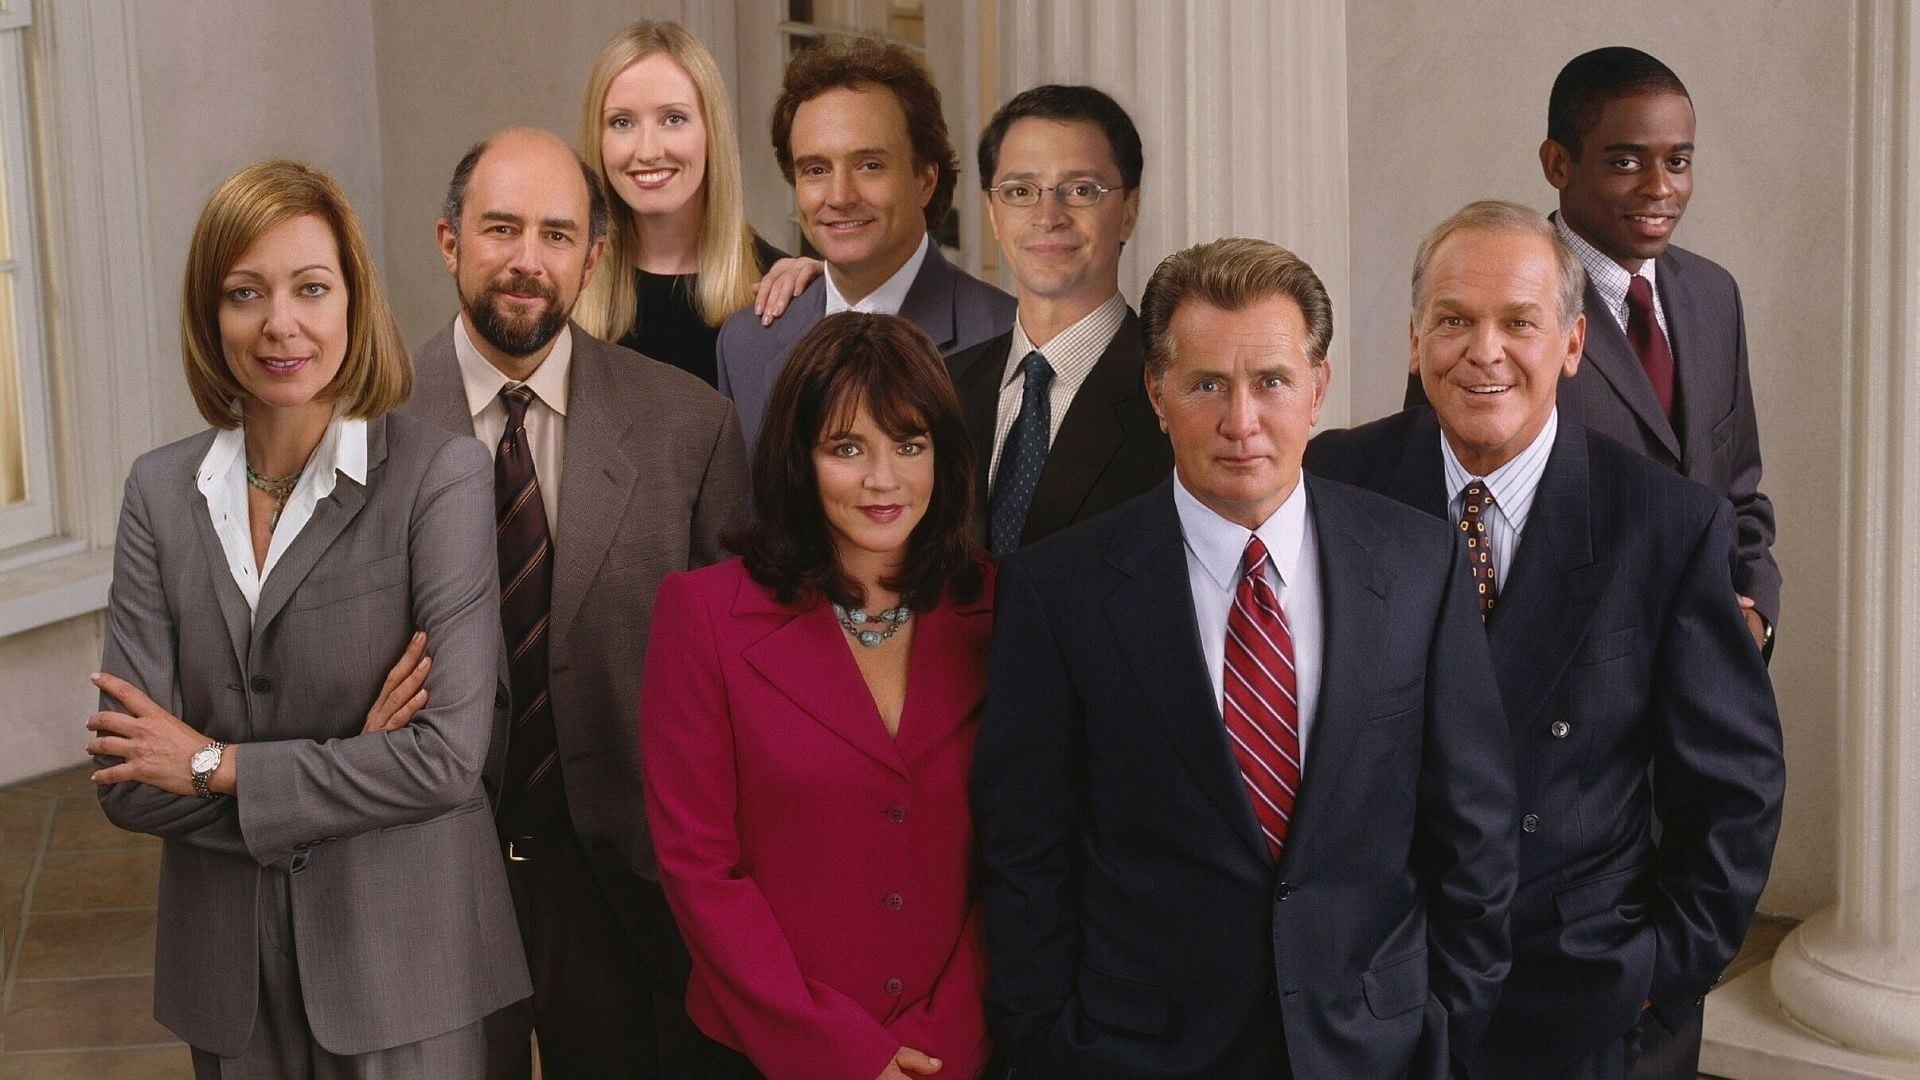 The West Wing (TV Series): Martin Sheen as Jed Bartlet, John Spencer as Leo McGarry, Allison Janney as CJ Cregg. 1920x1080 Full HD Background.